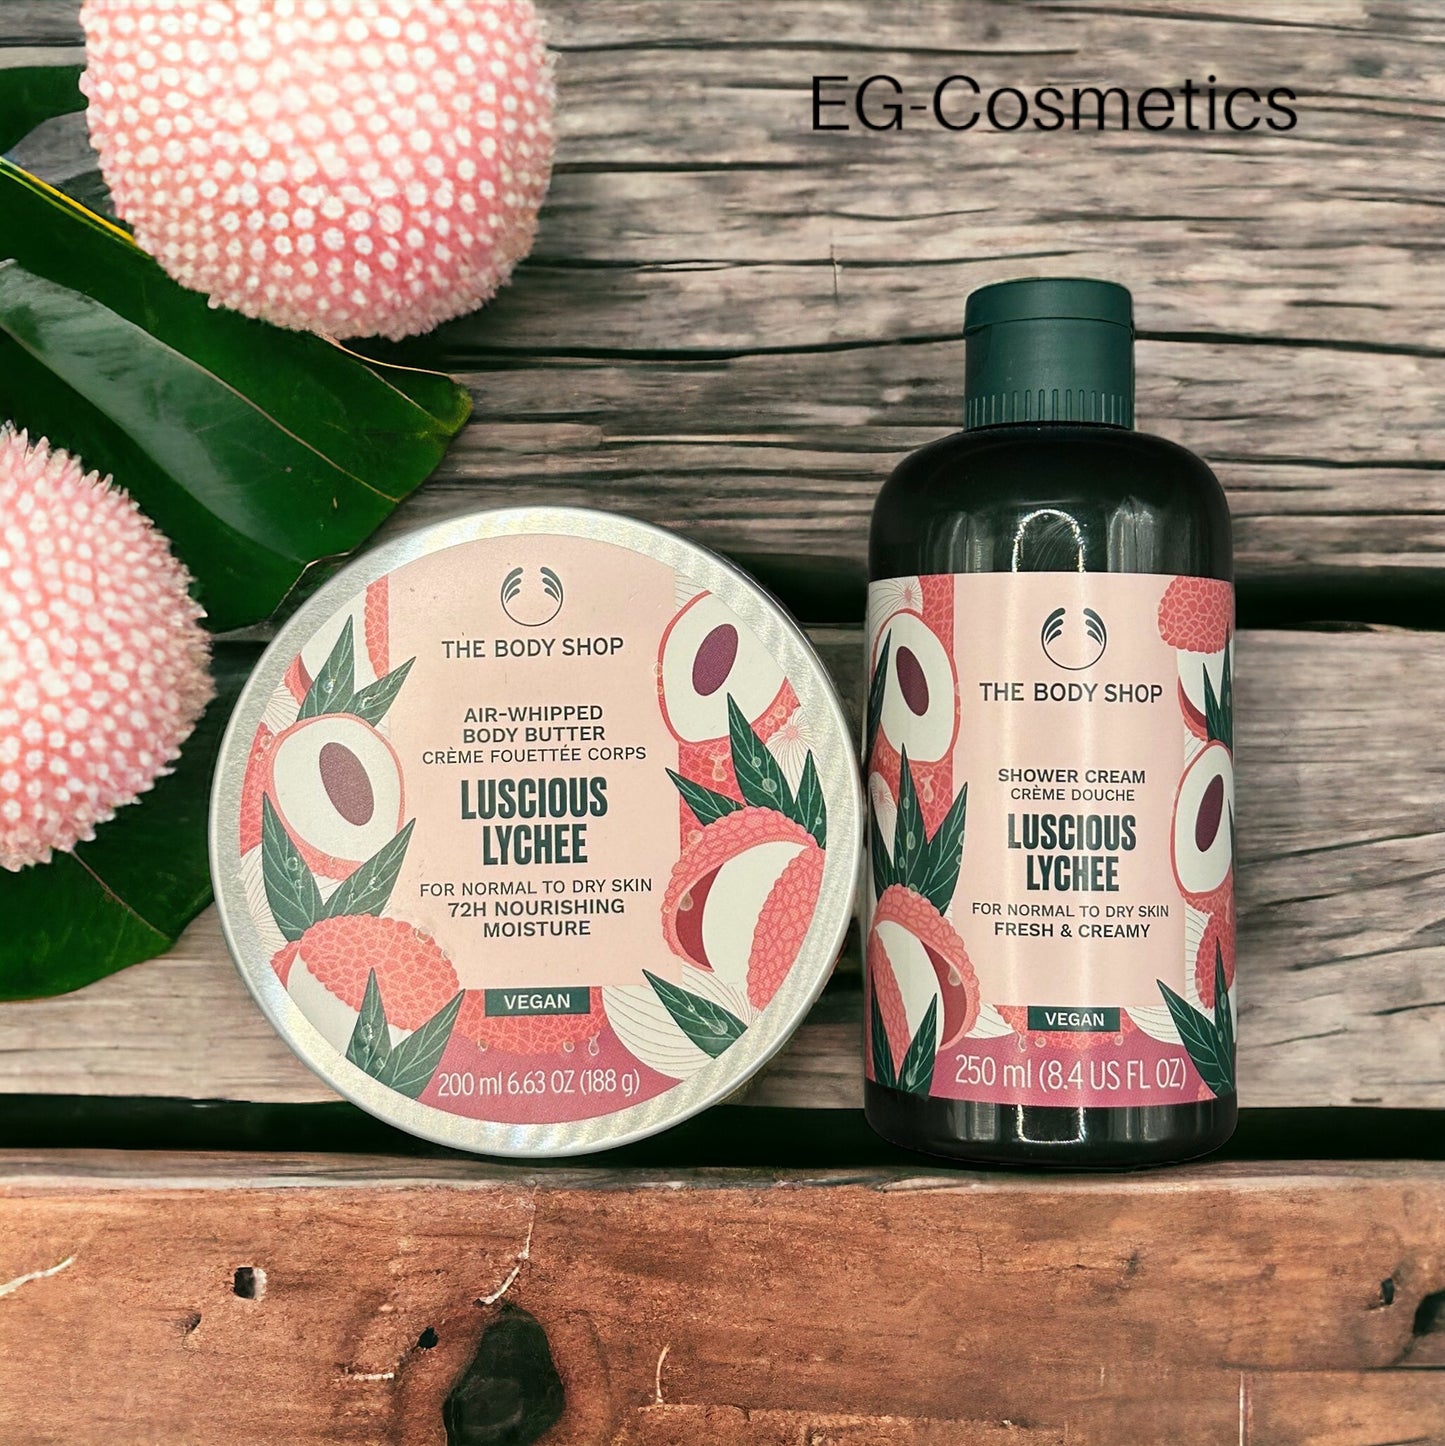 The Body Shop by EG-Cosmetics Luscious Lychee Body Butter & Shower Cream Duo